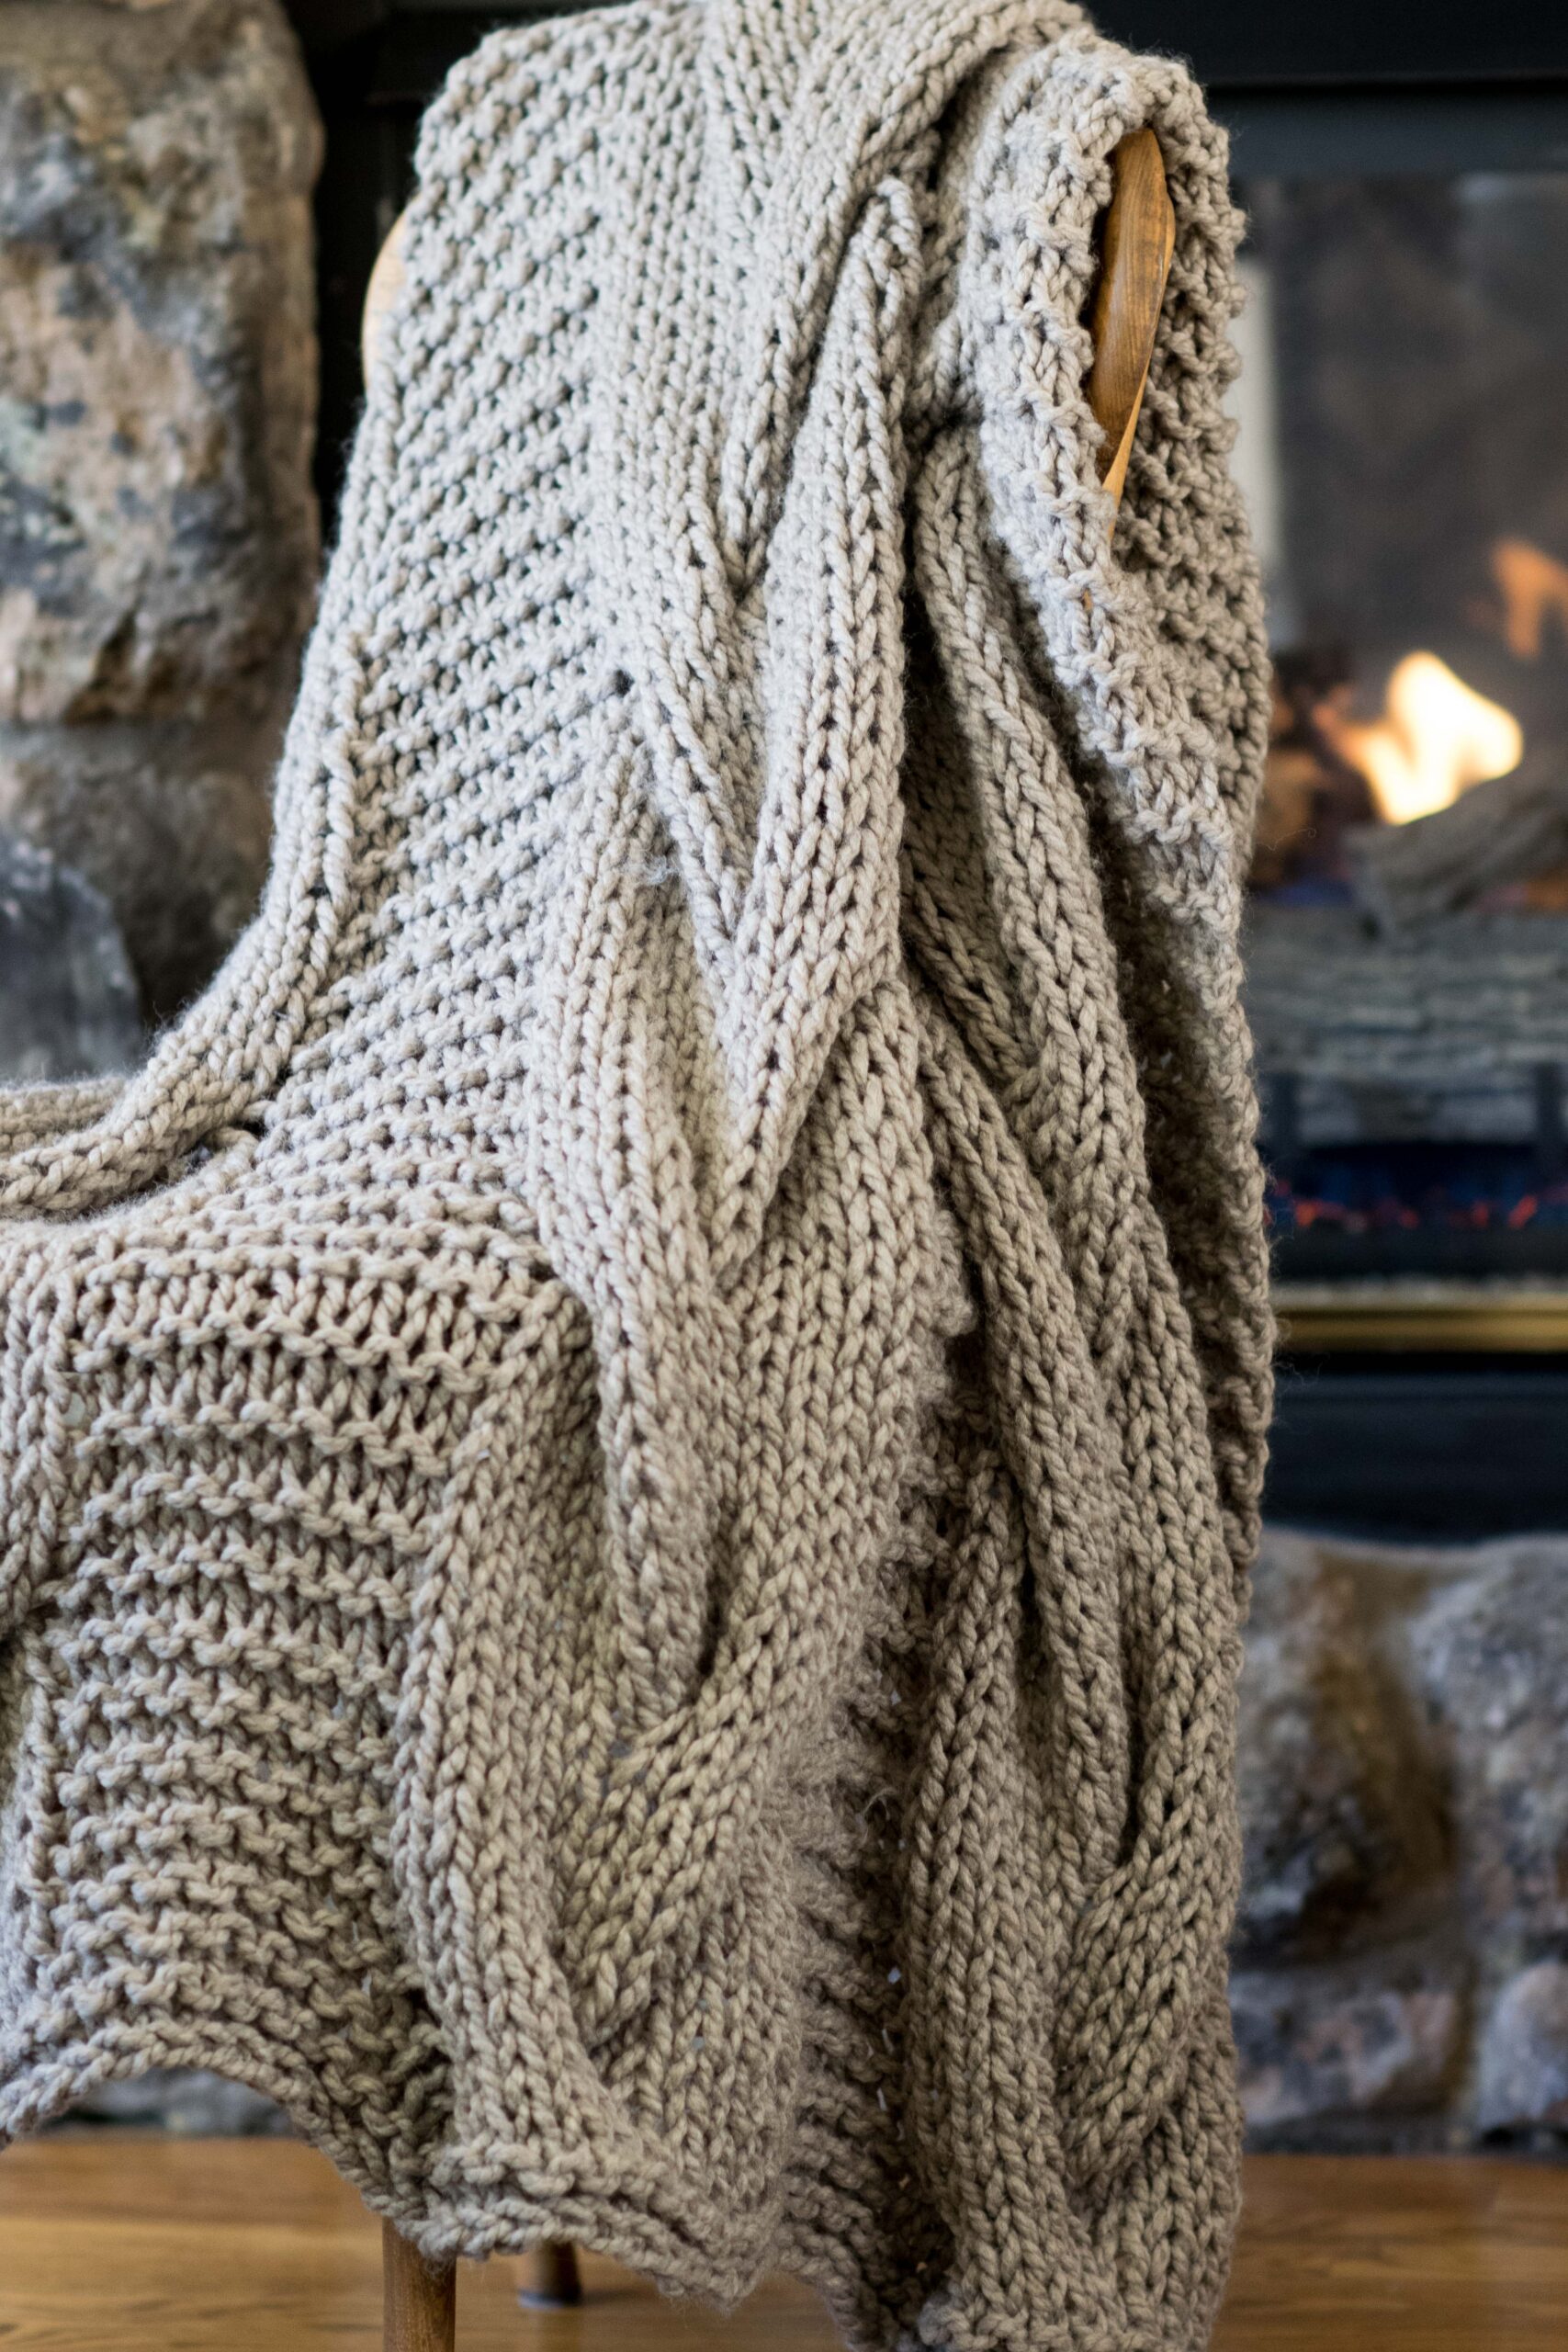 https://www.mamainastitch.com/wp-content/uploads/2021/10/Grand-Cables-Knit-Blanket-Pattern-7-scaled.jpg